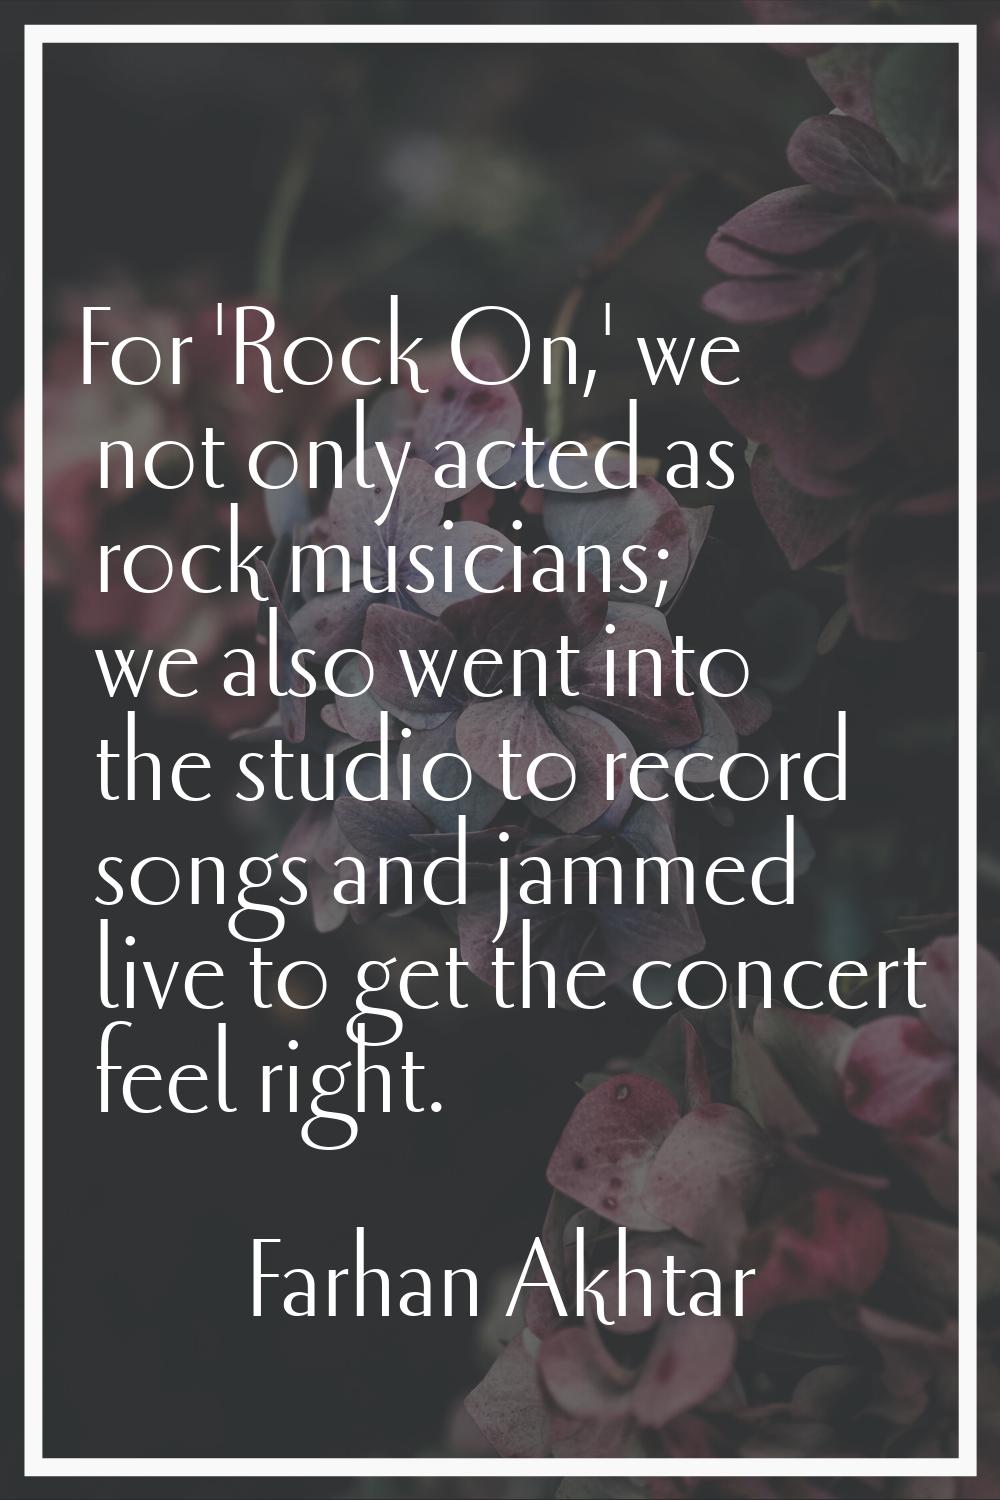 For 'Rock On,' we not only acted as rock musicians; we also went into the studio to record songs an